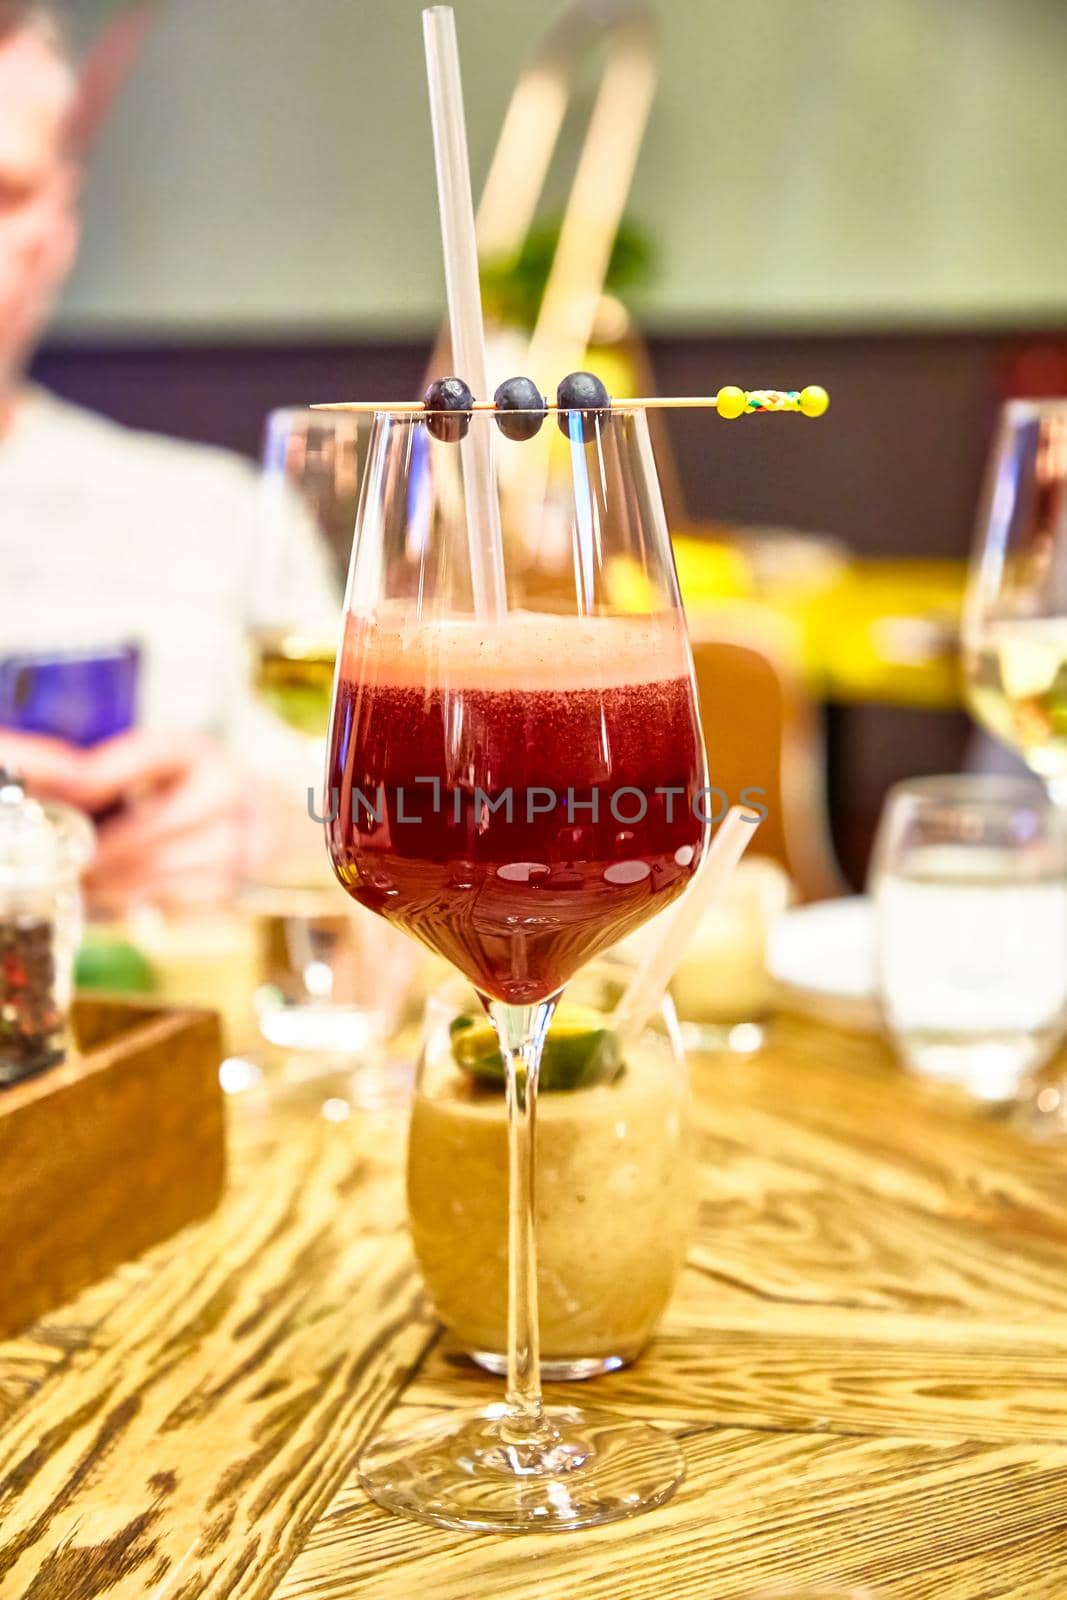 Cocktail or smoothie in a wine glass is on the table by Milanchikov